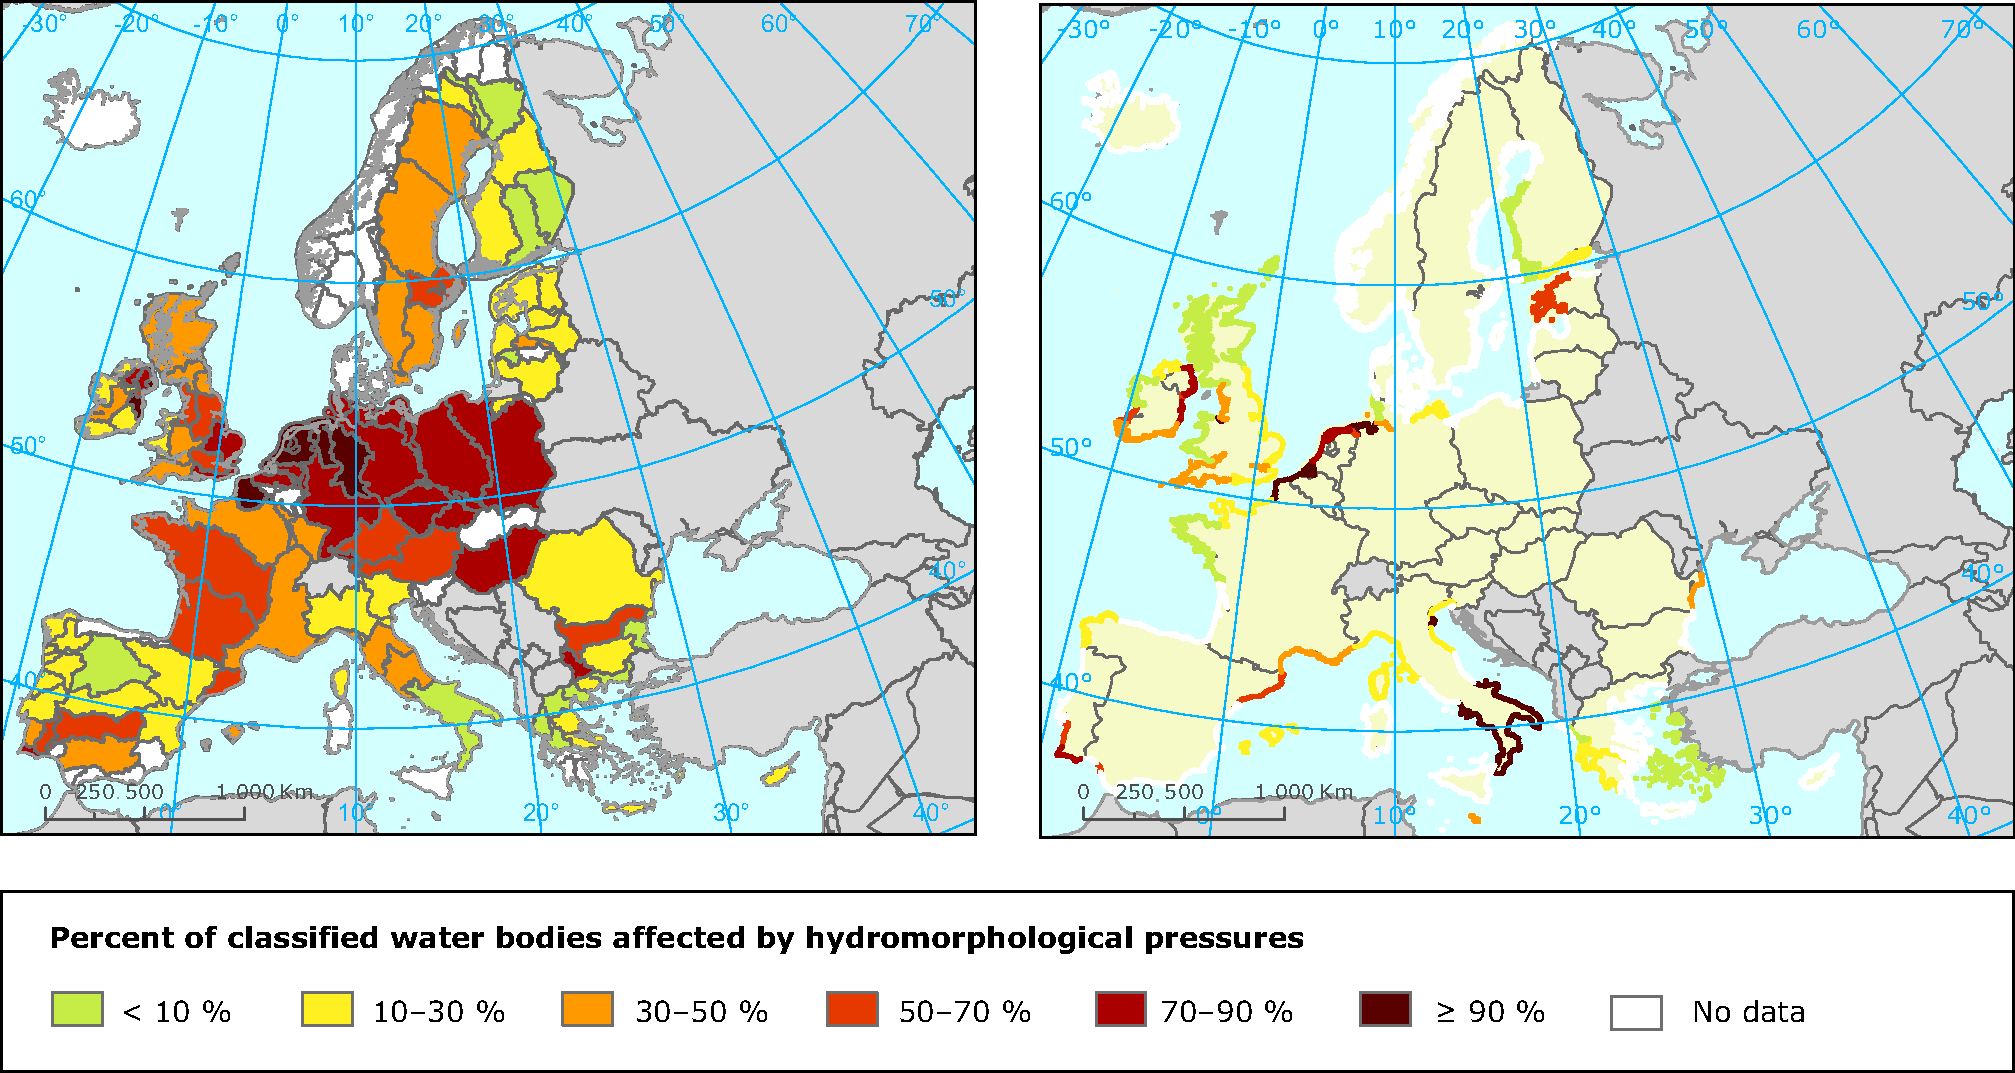 Proportion of classified water bodies in different RBDs affected by hydromorphological pressures, for rivers and lakes (left panel) and for coastal and transitional waters (right panel)